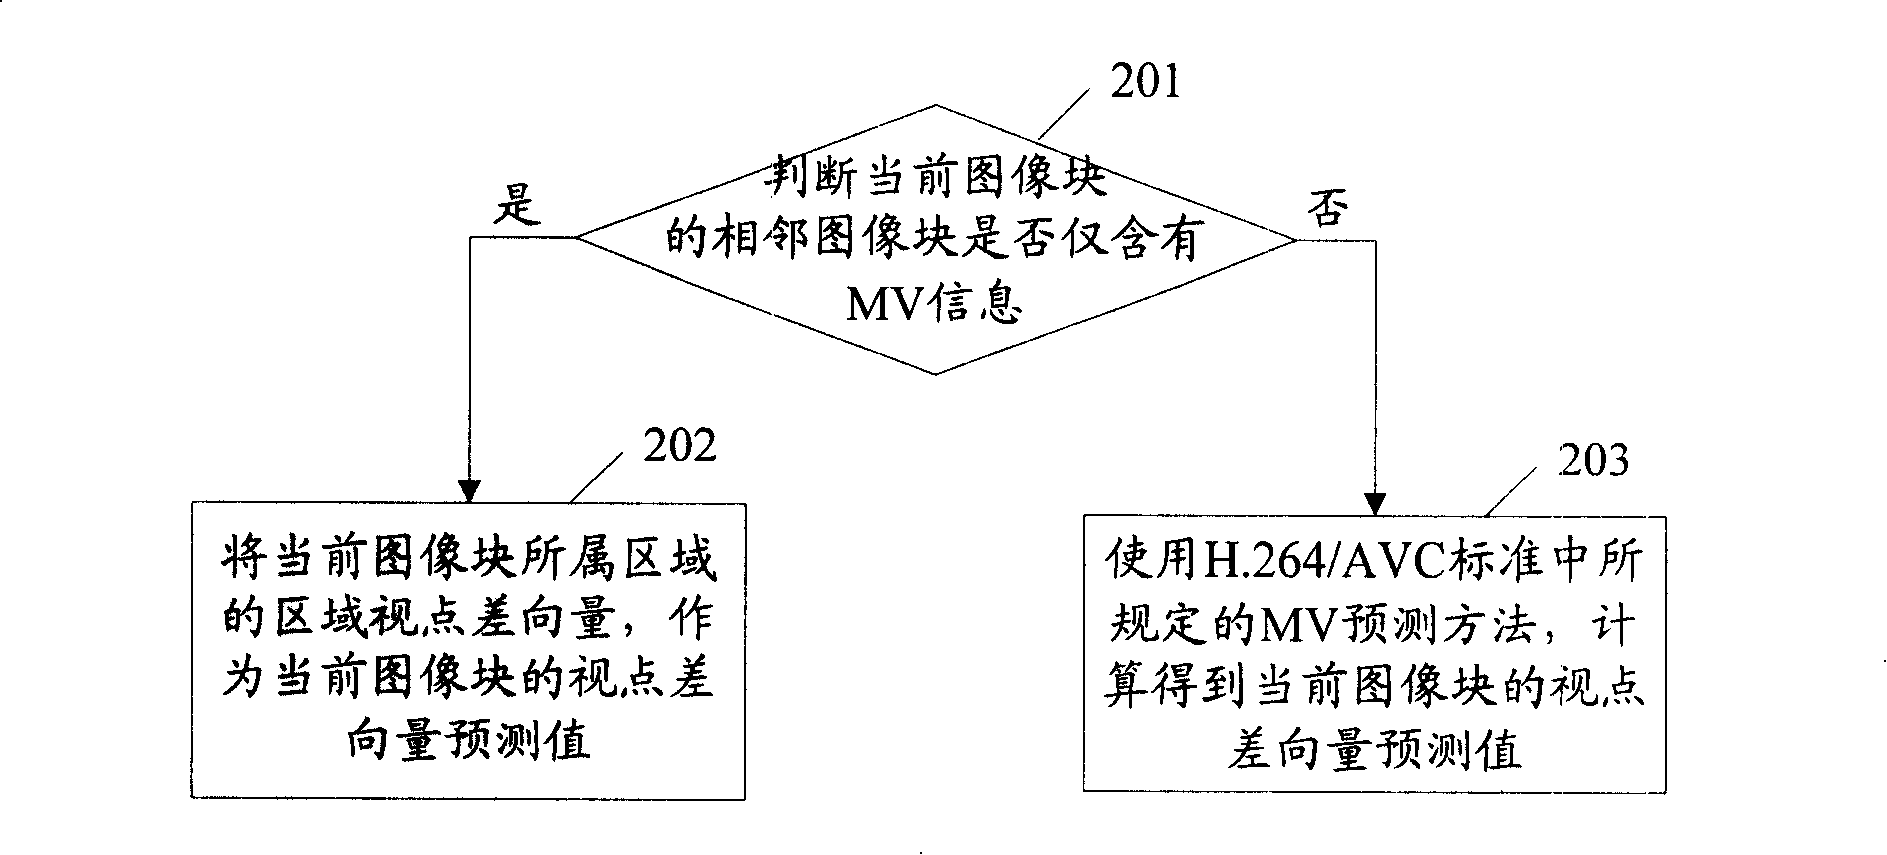 Multi-viewpoint video coding and decoding system, method and device for estimating vector